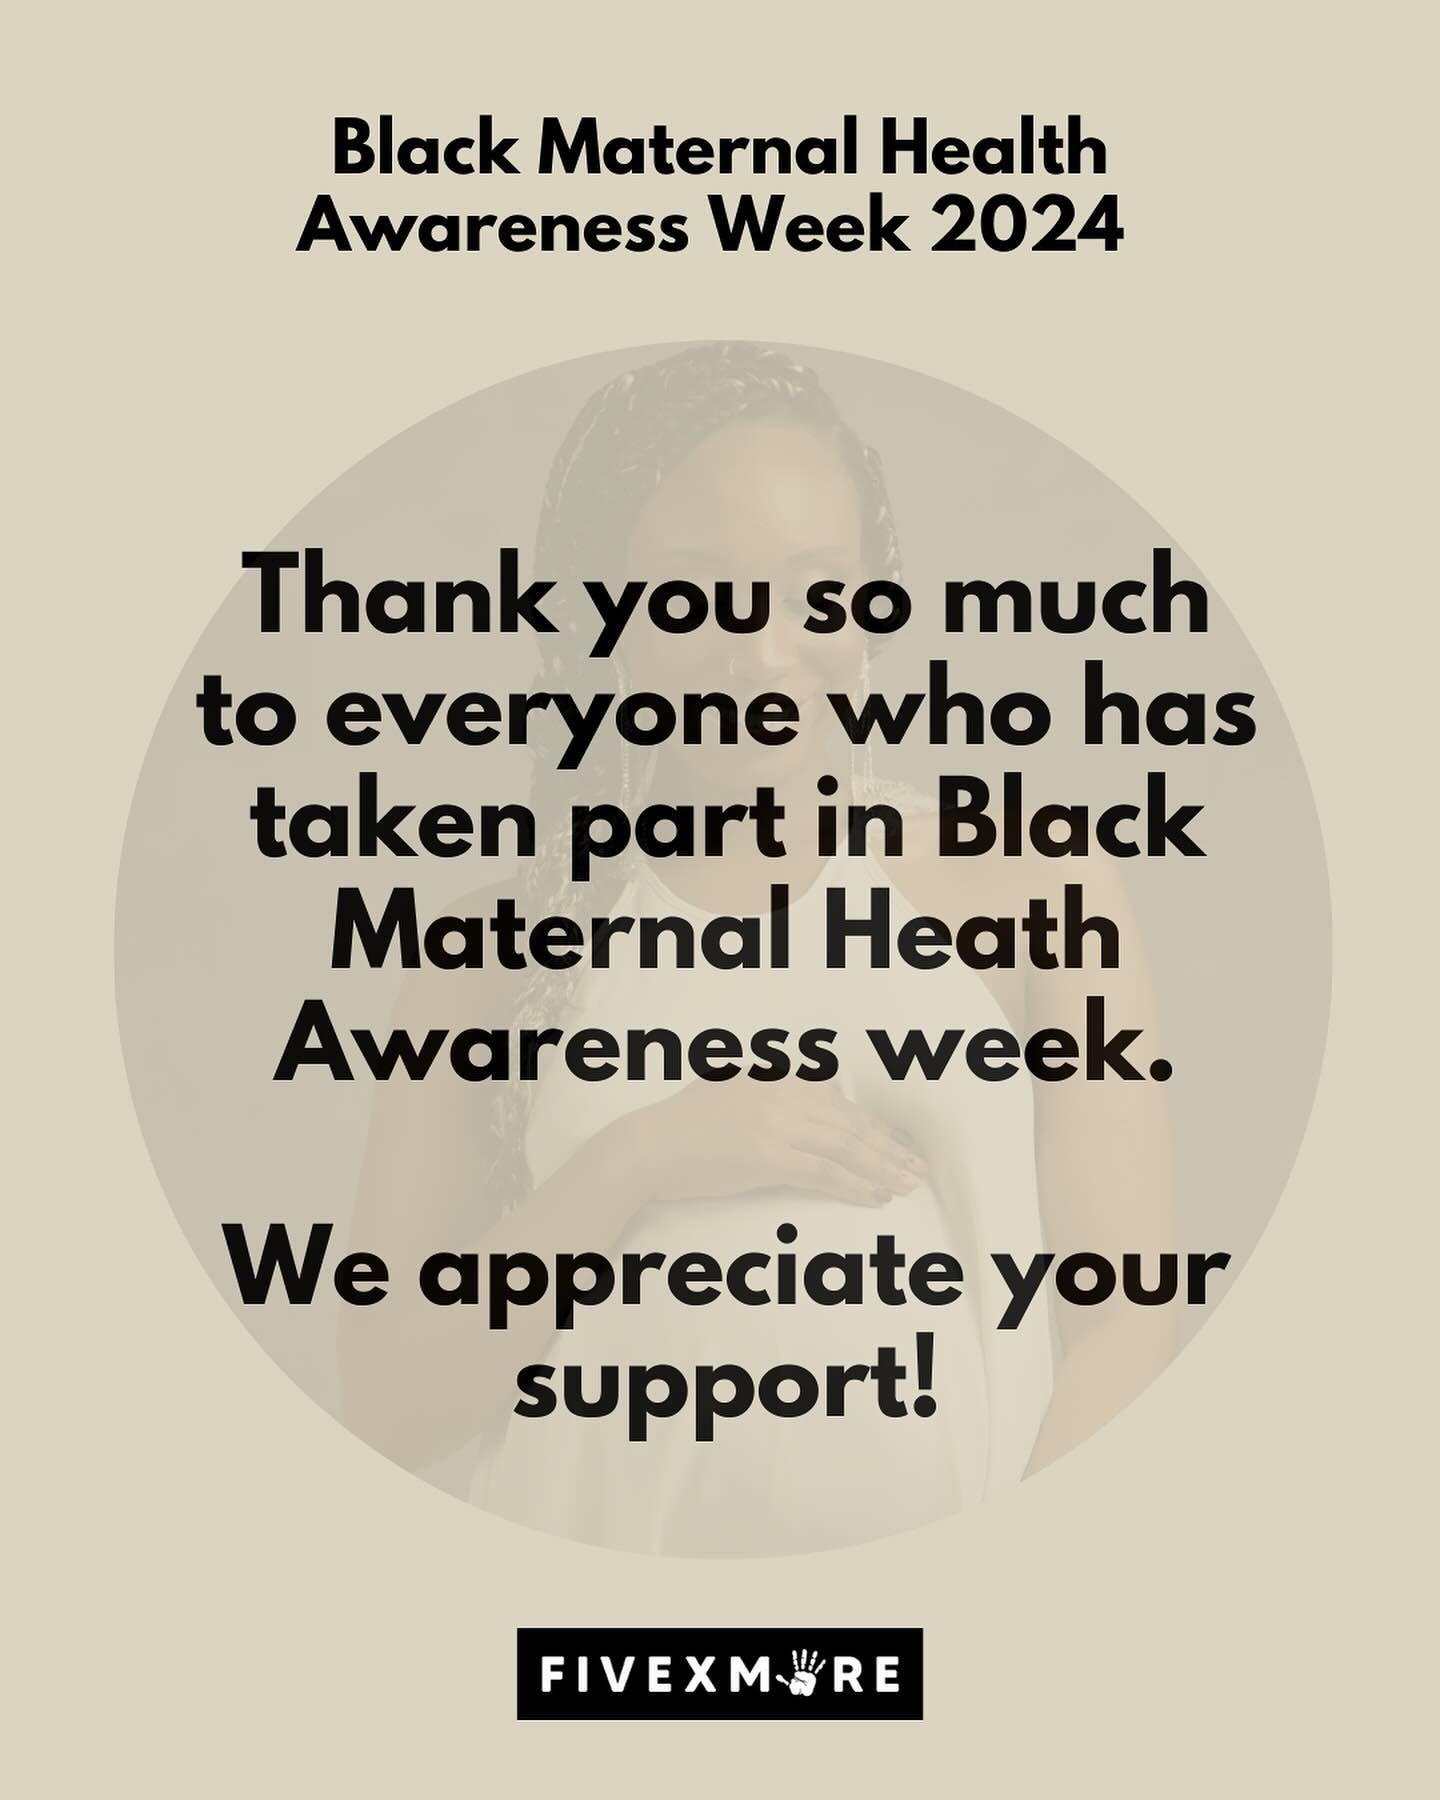 Thank you to everyone who took part in the awareness week. Thank you to the organisation that collaborated with us and the individuals who sent us informative videos. A big thank you to Black Maternal Health Awareness Week committee members who gave 